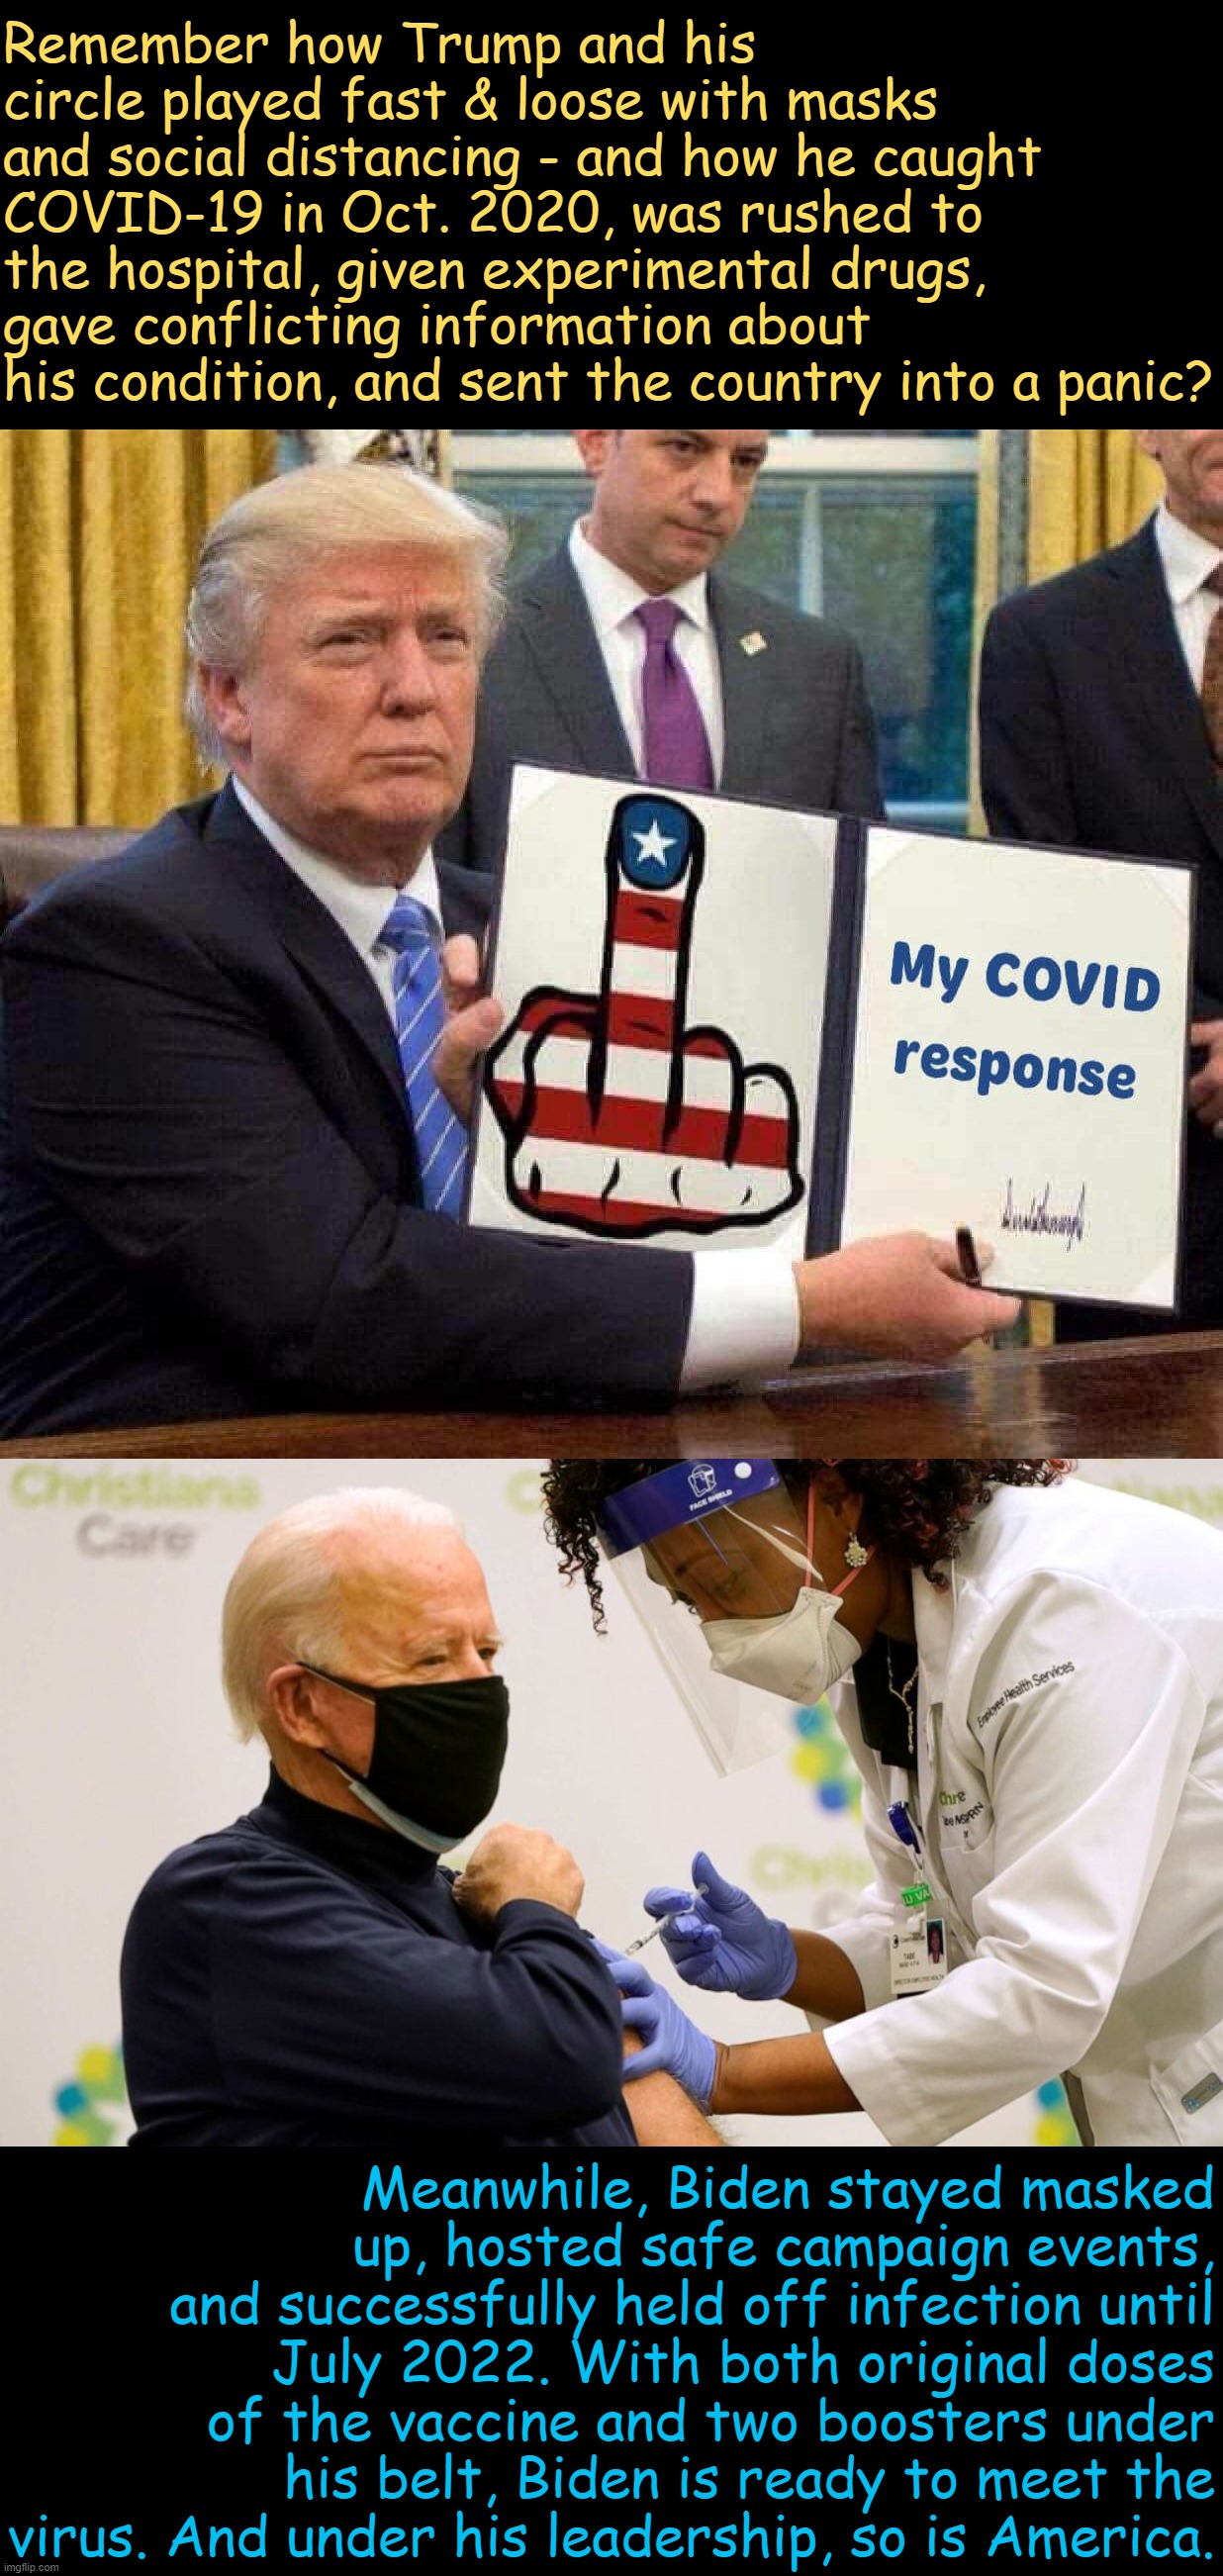 This tale of two Covid infections is, in so many ways, a tale of two different leaders - and two different countries. | Remember how Trump and his circle played fast & loose with masks and social distancing - and how he caught COVID-19 in Oct. 2020, was rushed to the hospital, given experimental drugs, gave conflicting information about his condition, and sent the country into a panic? Meanwhile, Biden stayed masked up, hosted safe campaign events, and successfully held off infection until July 2022. With both original doses of the vaccine and two boosters under his belt, Biden is ready to meet the virus. And under his leadership, so is America. | image tagged in trump's covid-19 response,biden vaccine,covid-19,covid19,coronavirus,trump vs biden | made w/ Imgflip meme maker